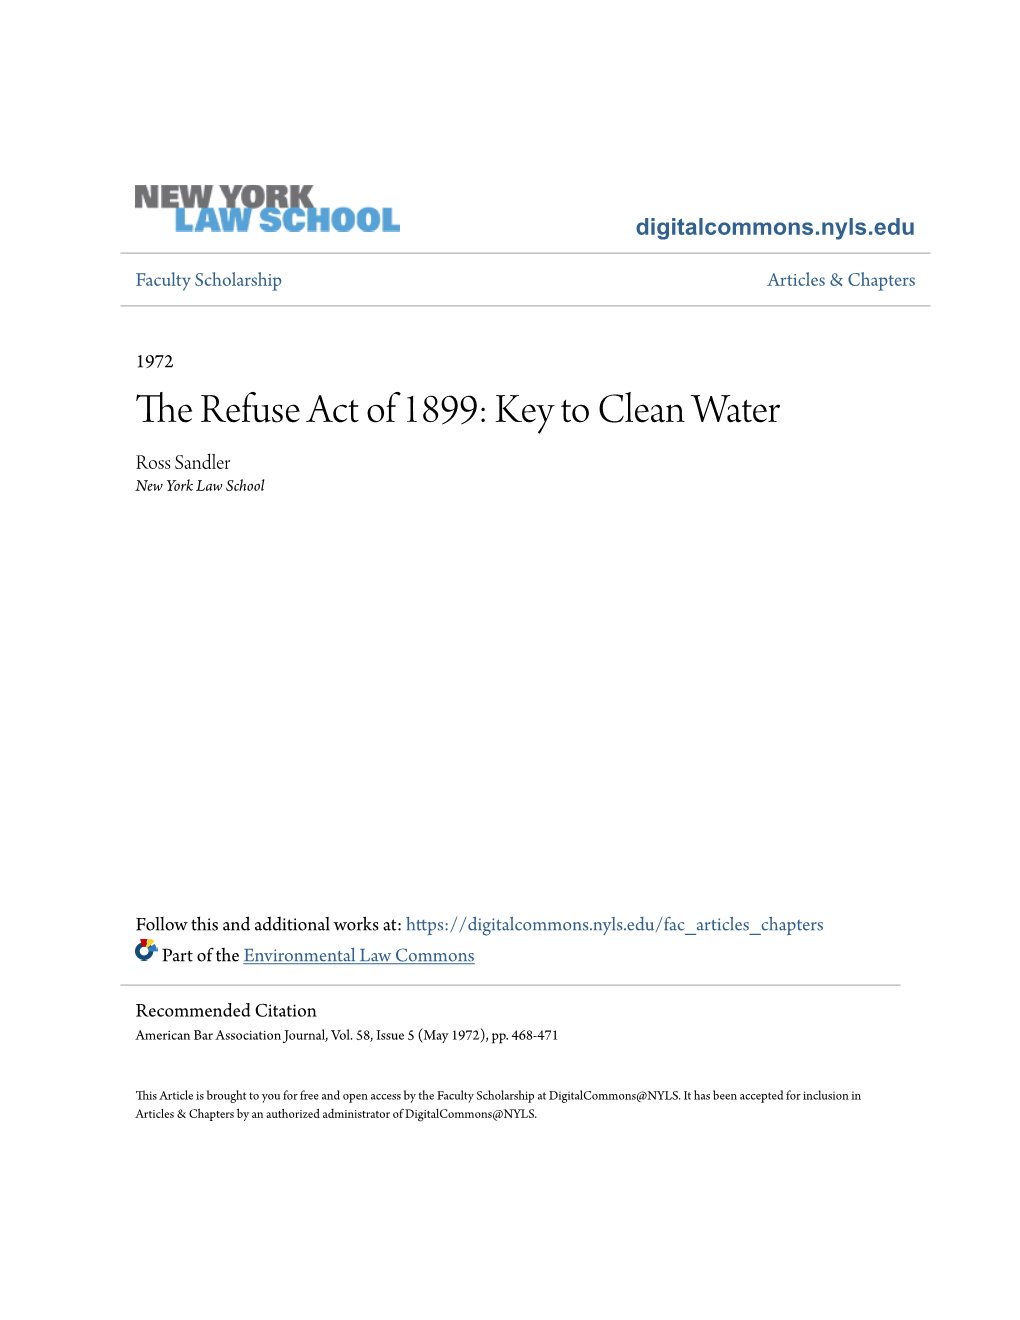 The Refuse Act of 1899: Key to Clean Water Ross Sandler New York Law School